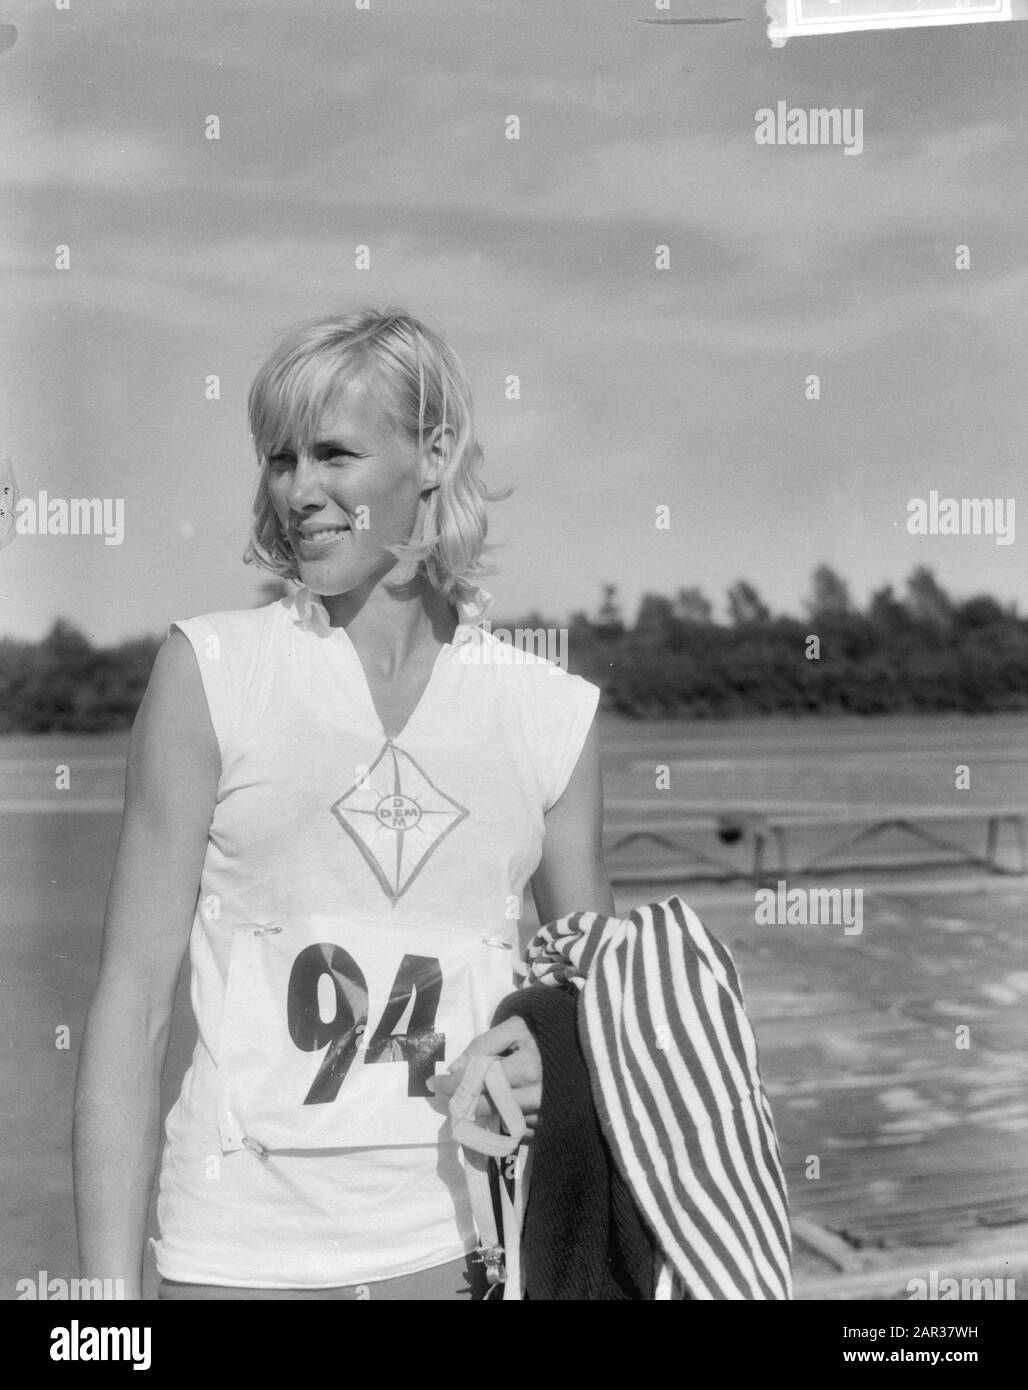 Dutch athletics championships in Groningen, Miss M. Thomas, winner high jump Date: August 14, 1965 Location: Groningen Keywords: athletics, championships, winners Personal name: Thomas, M. Stock Photo